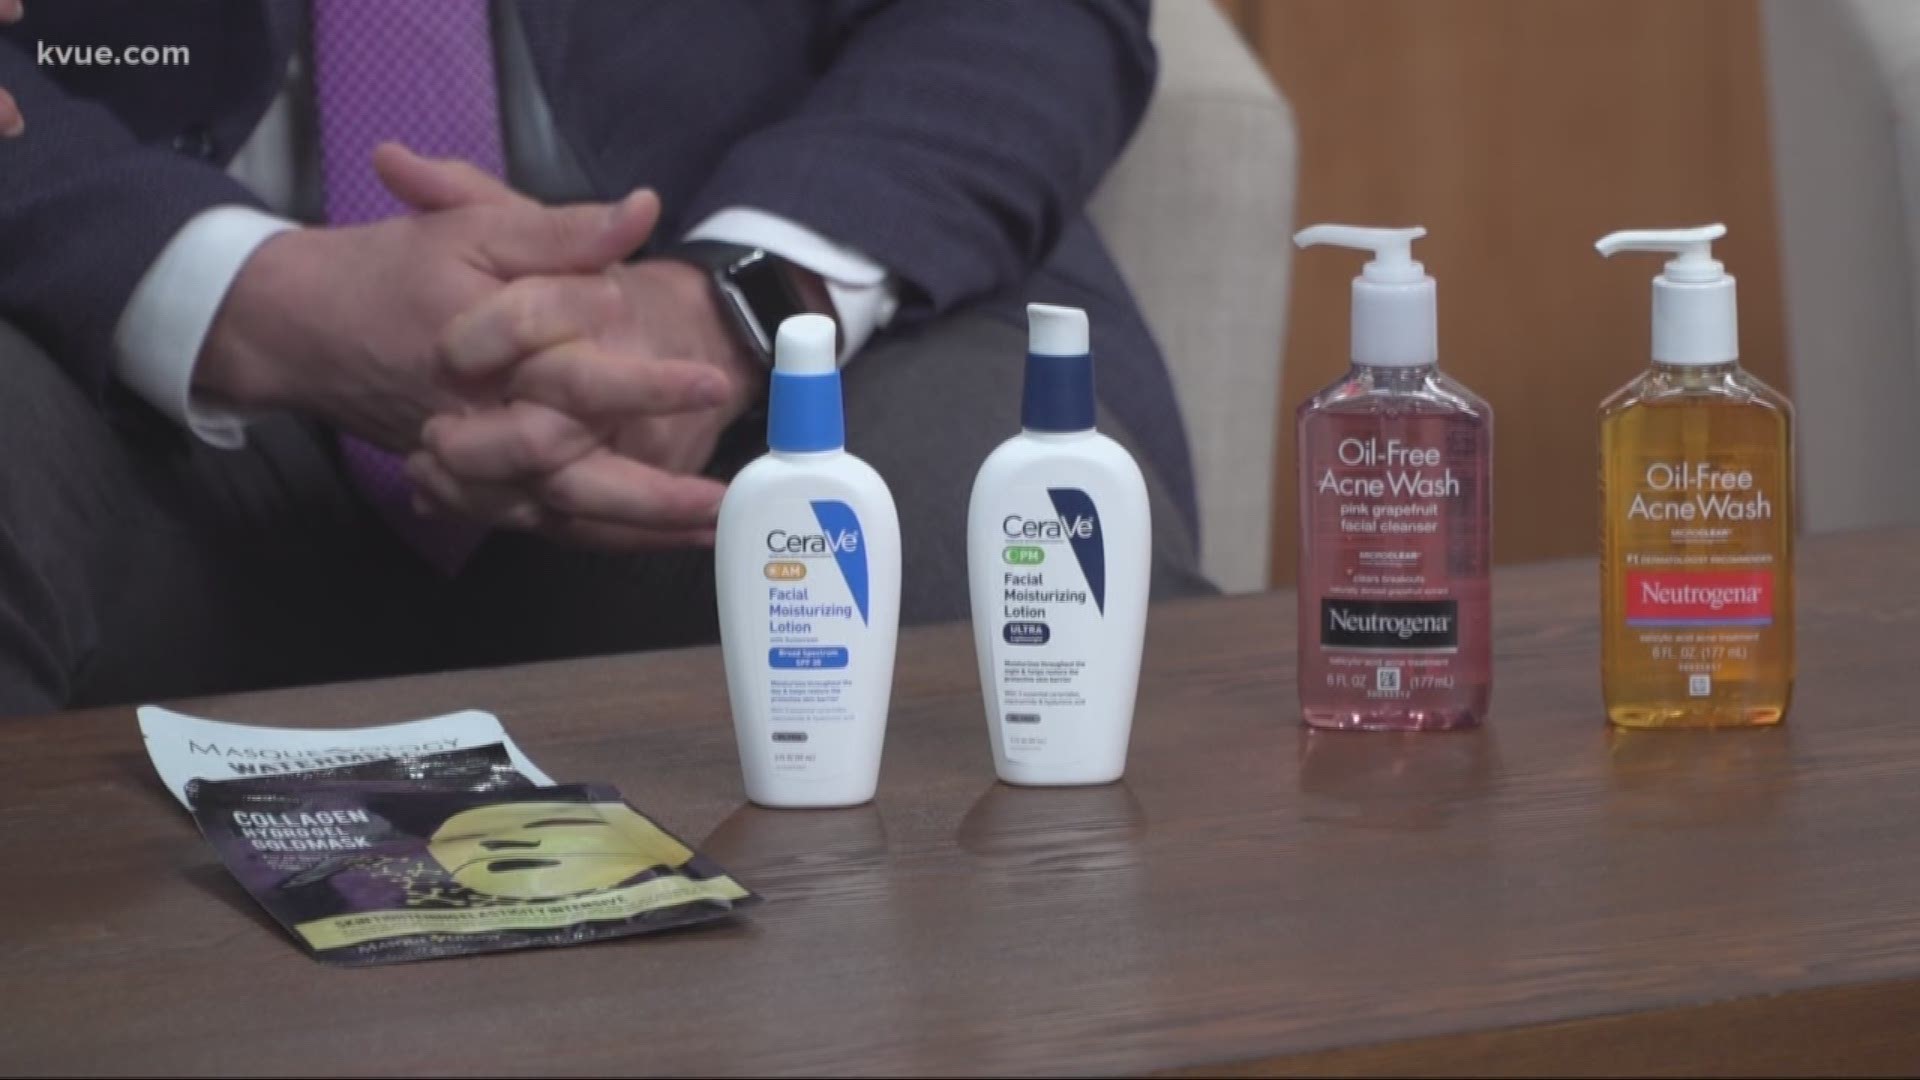 Dr. Ted Lain with Sanova Dermatology is at KVUE to explain the best products for men, women and teens.